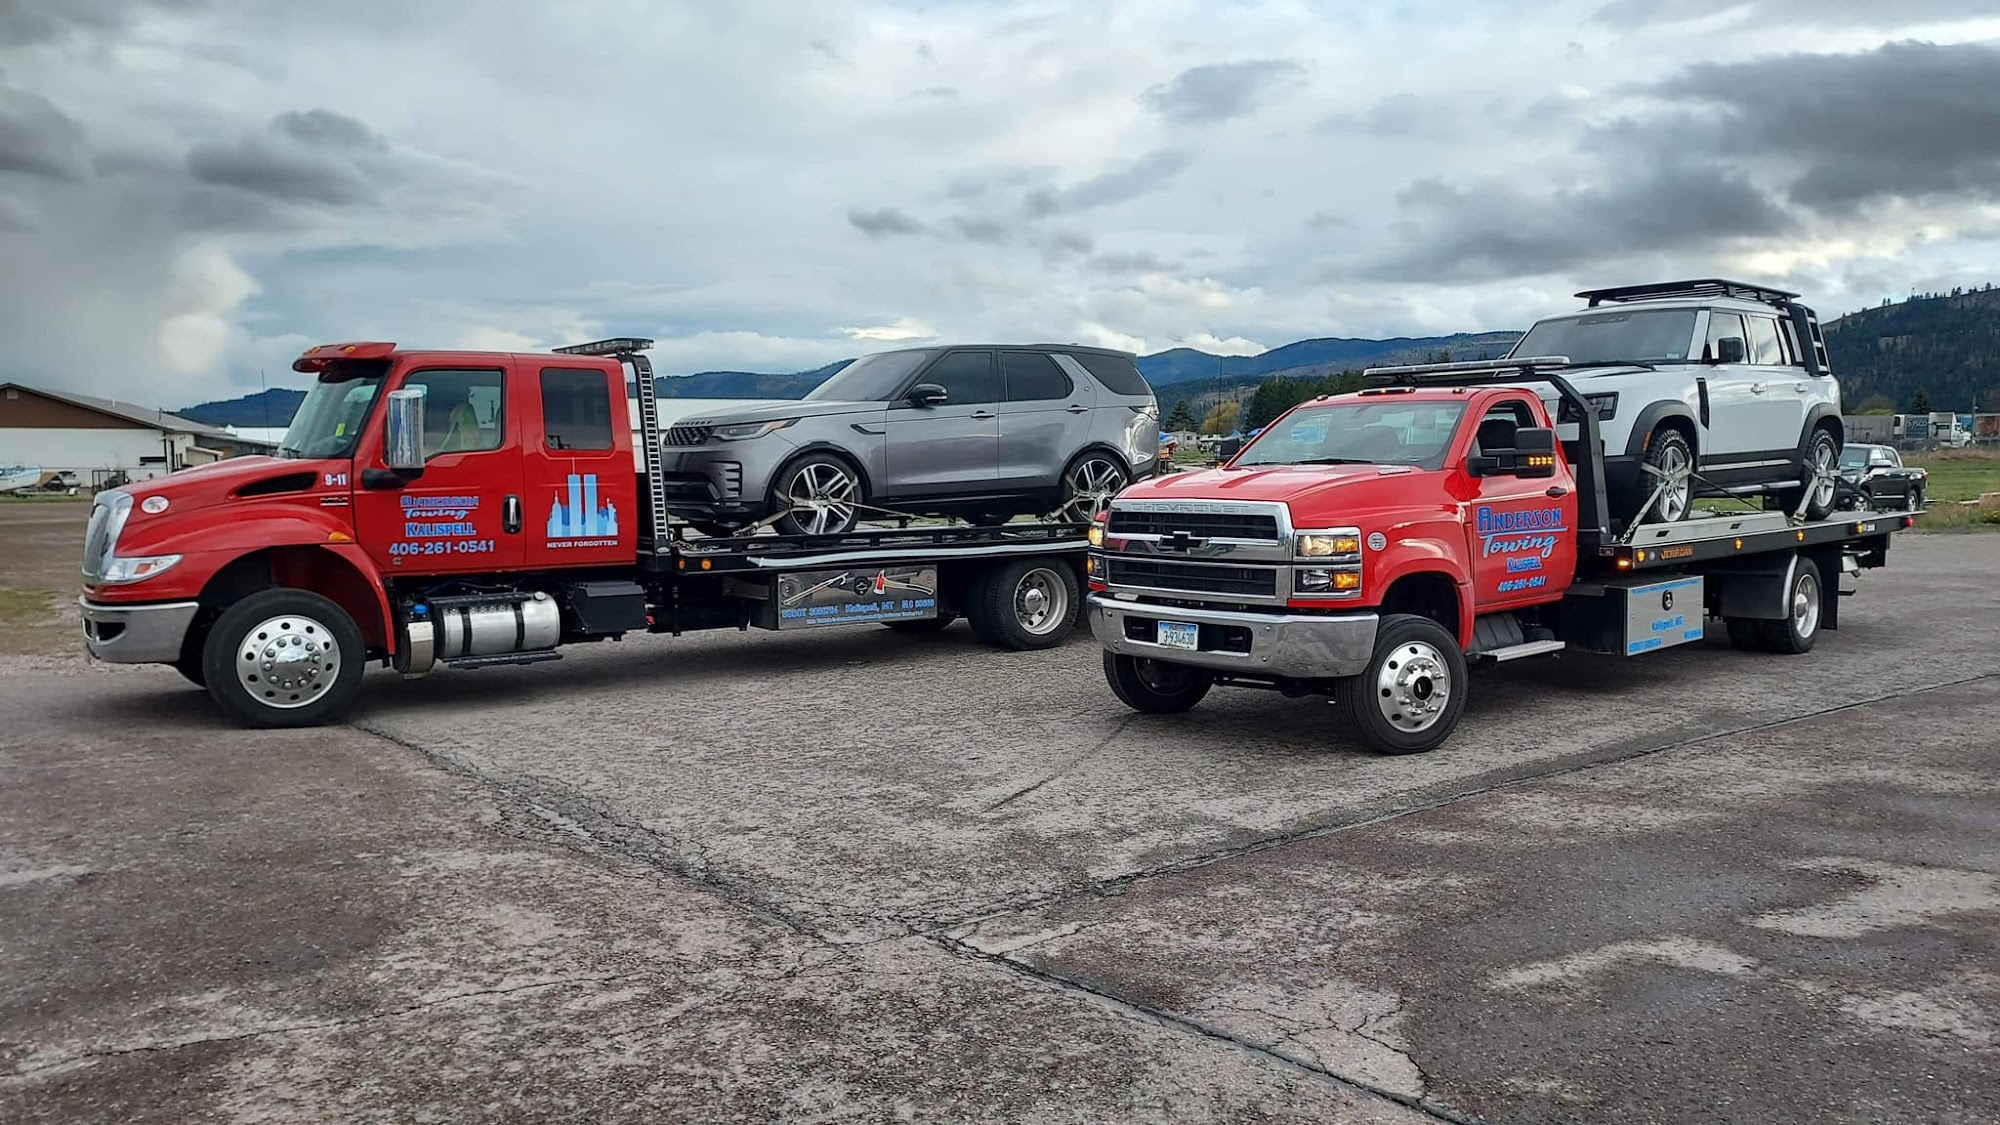 Anderson Towing